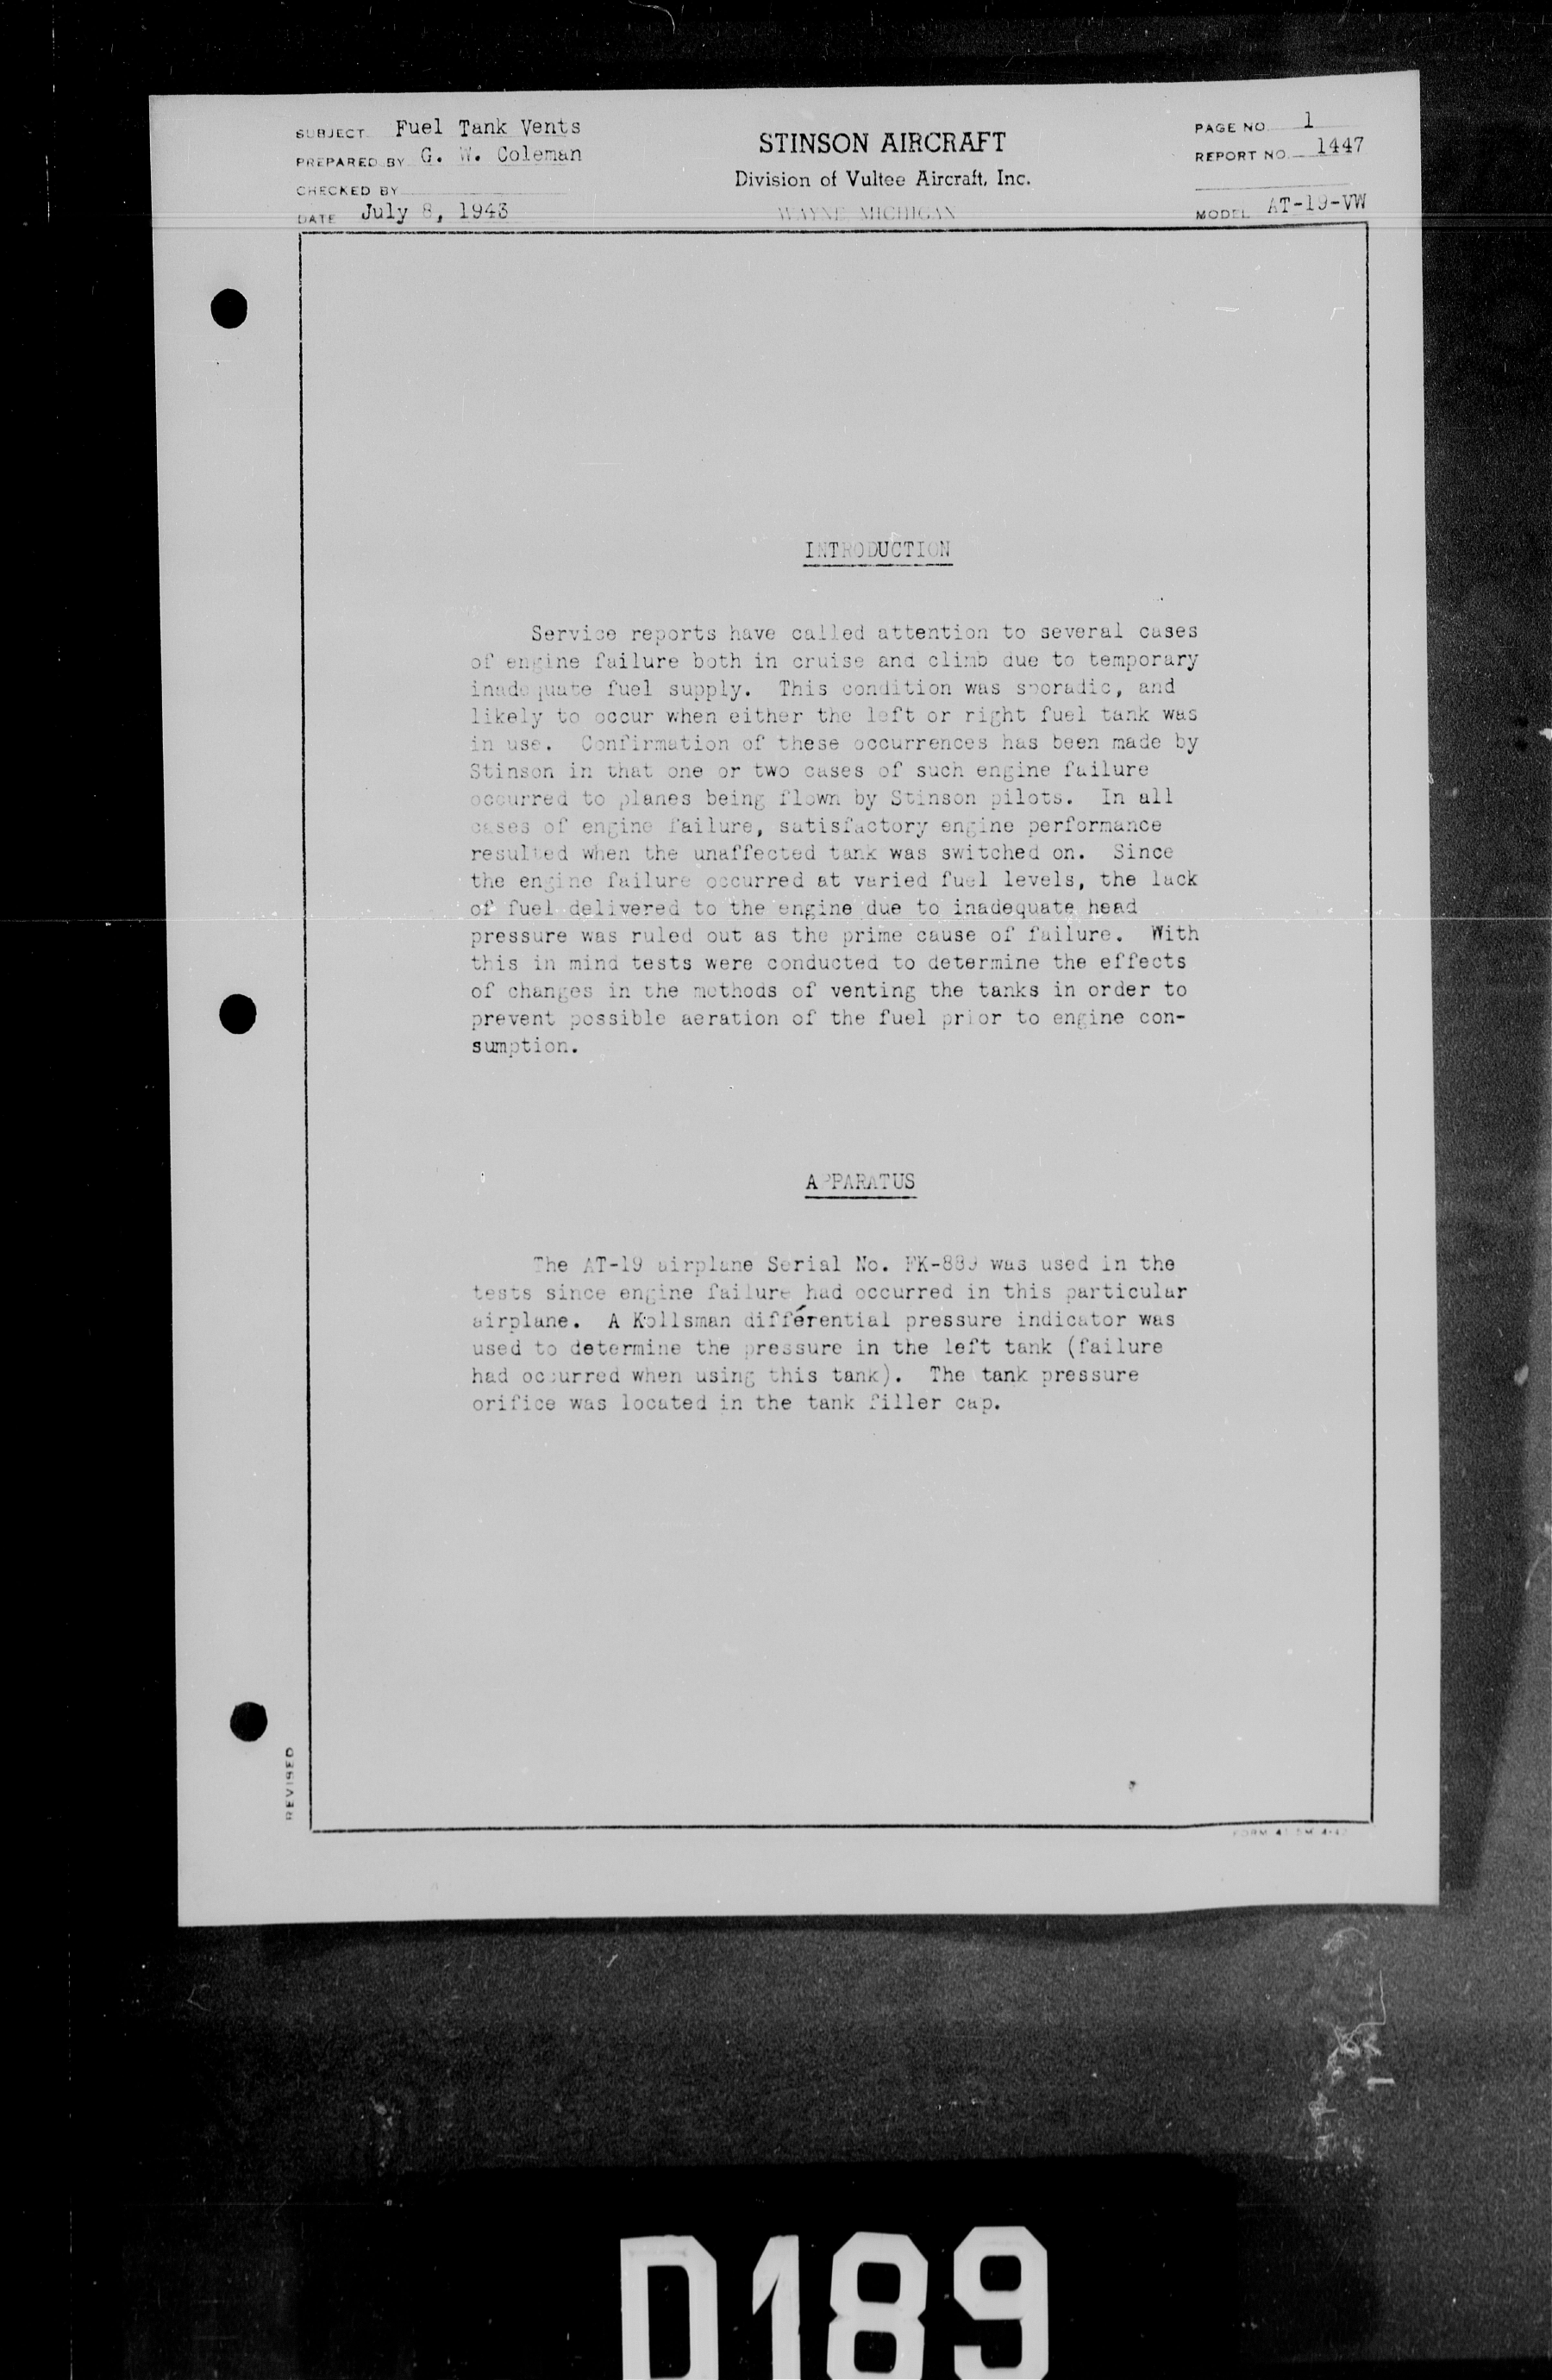 Sample page 5 from AirCorps Library document: Fuel Tank Vent Flight Tests on Model AT-19-VR